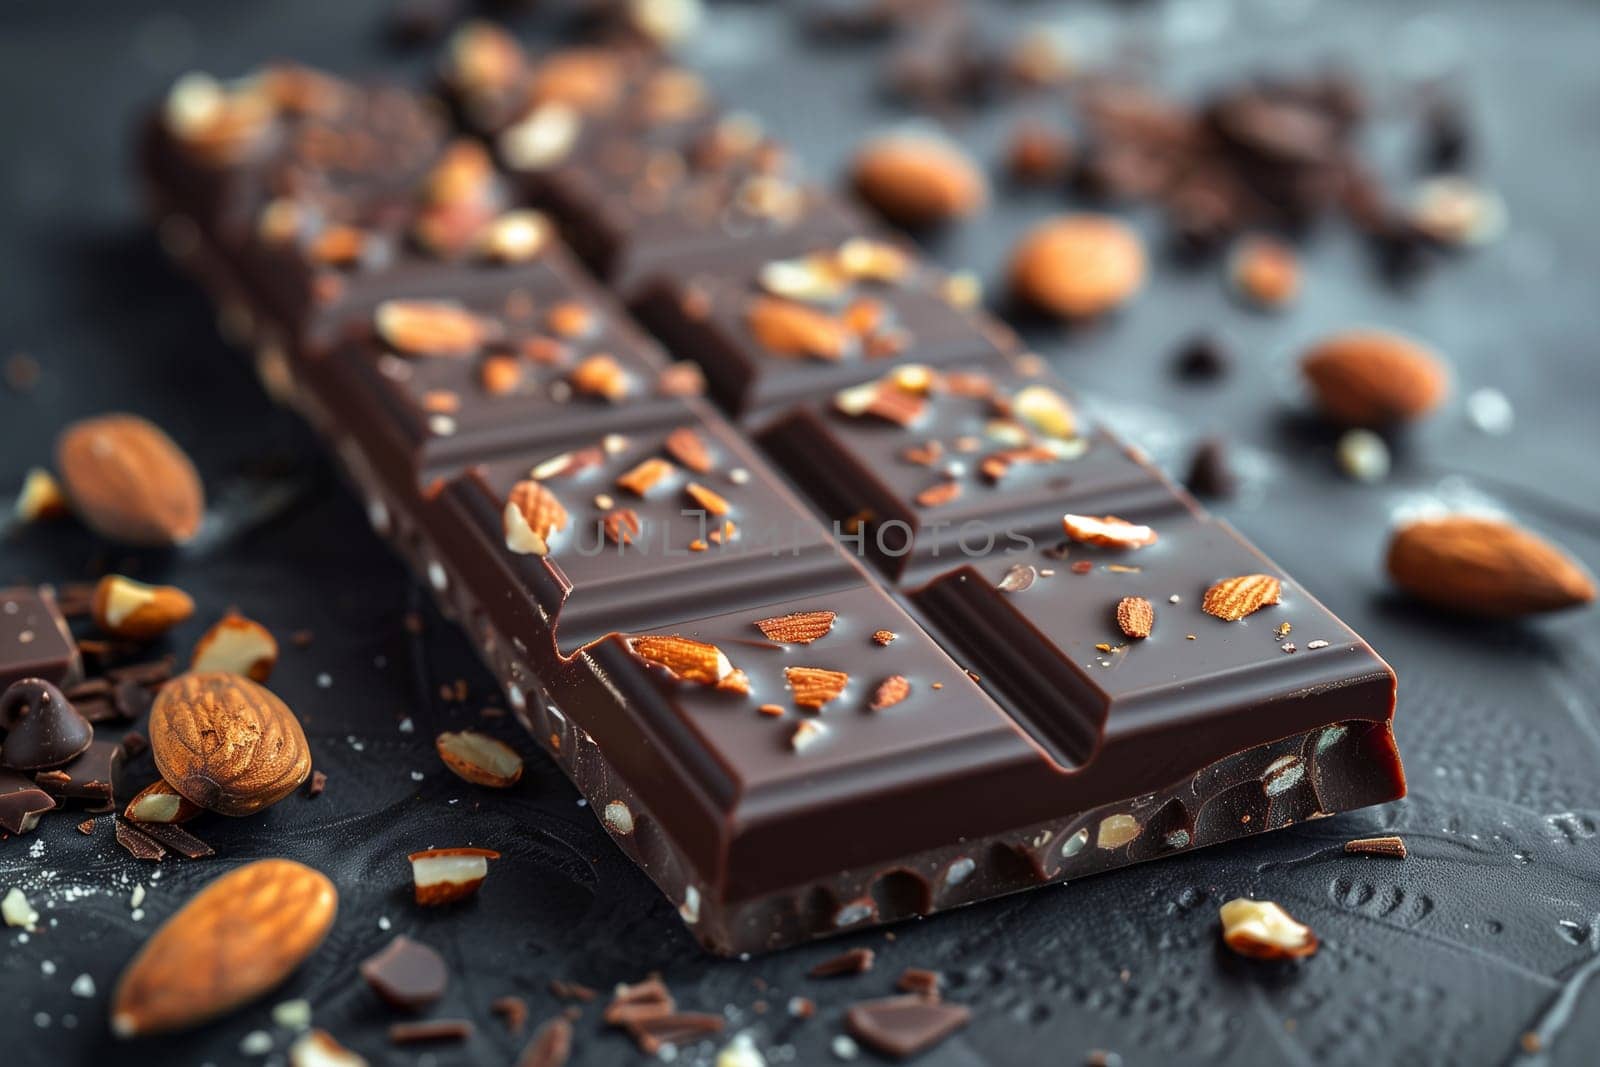 A detailed view of a chocolate bar filled with crunchy nuts, showcasing the rich texture and flavors of the treat.